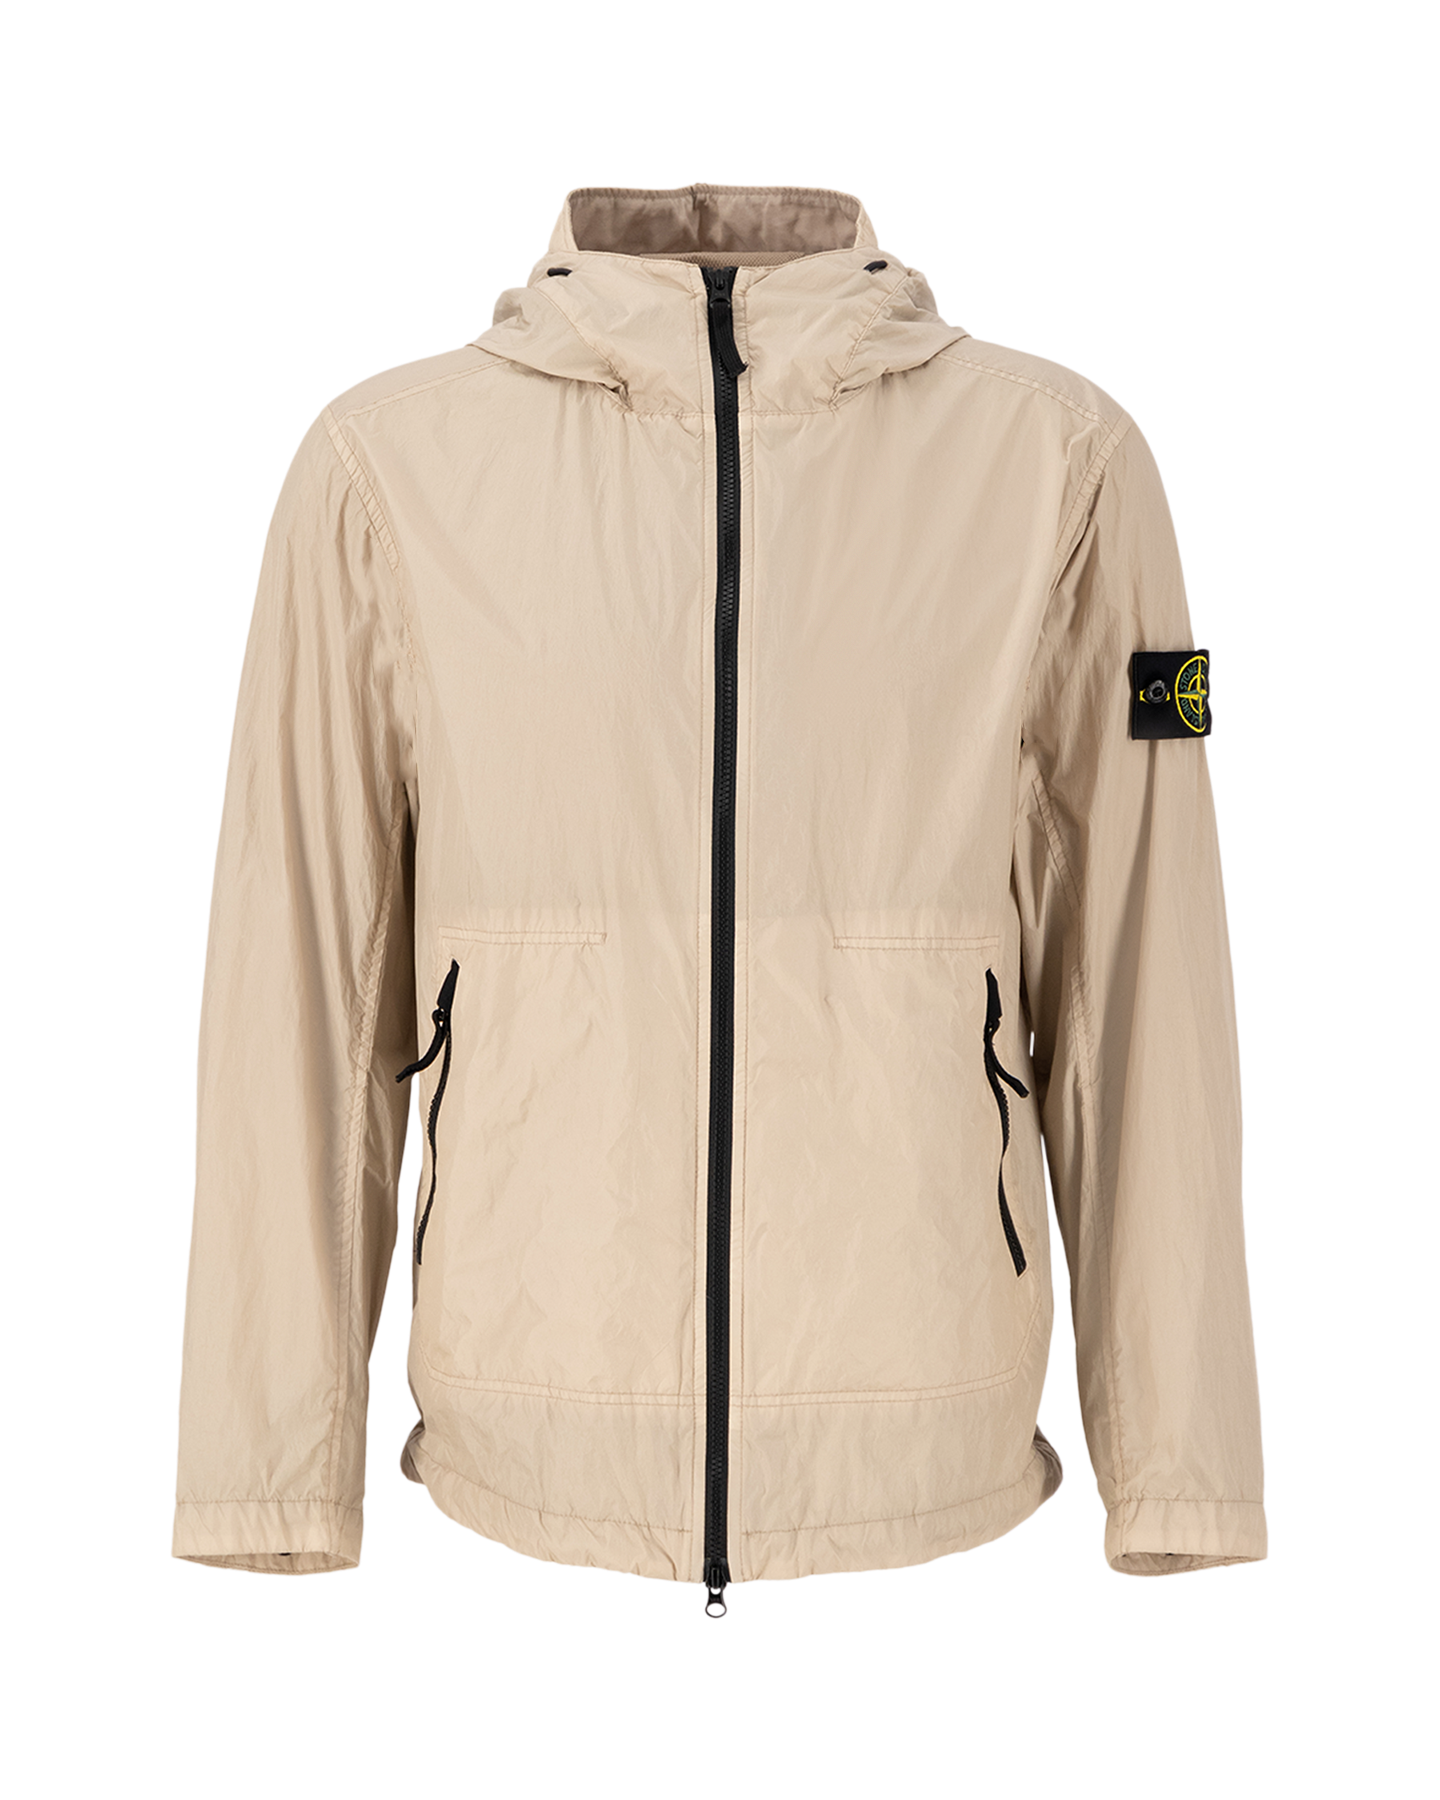 Stone Island 40522 Garment Dyed Crinkle Reps Hooded Jacket TAUPE 1